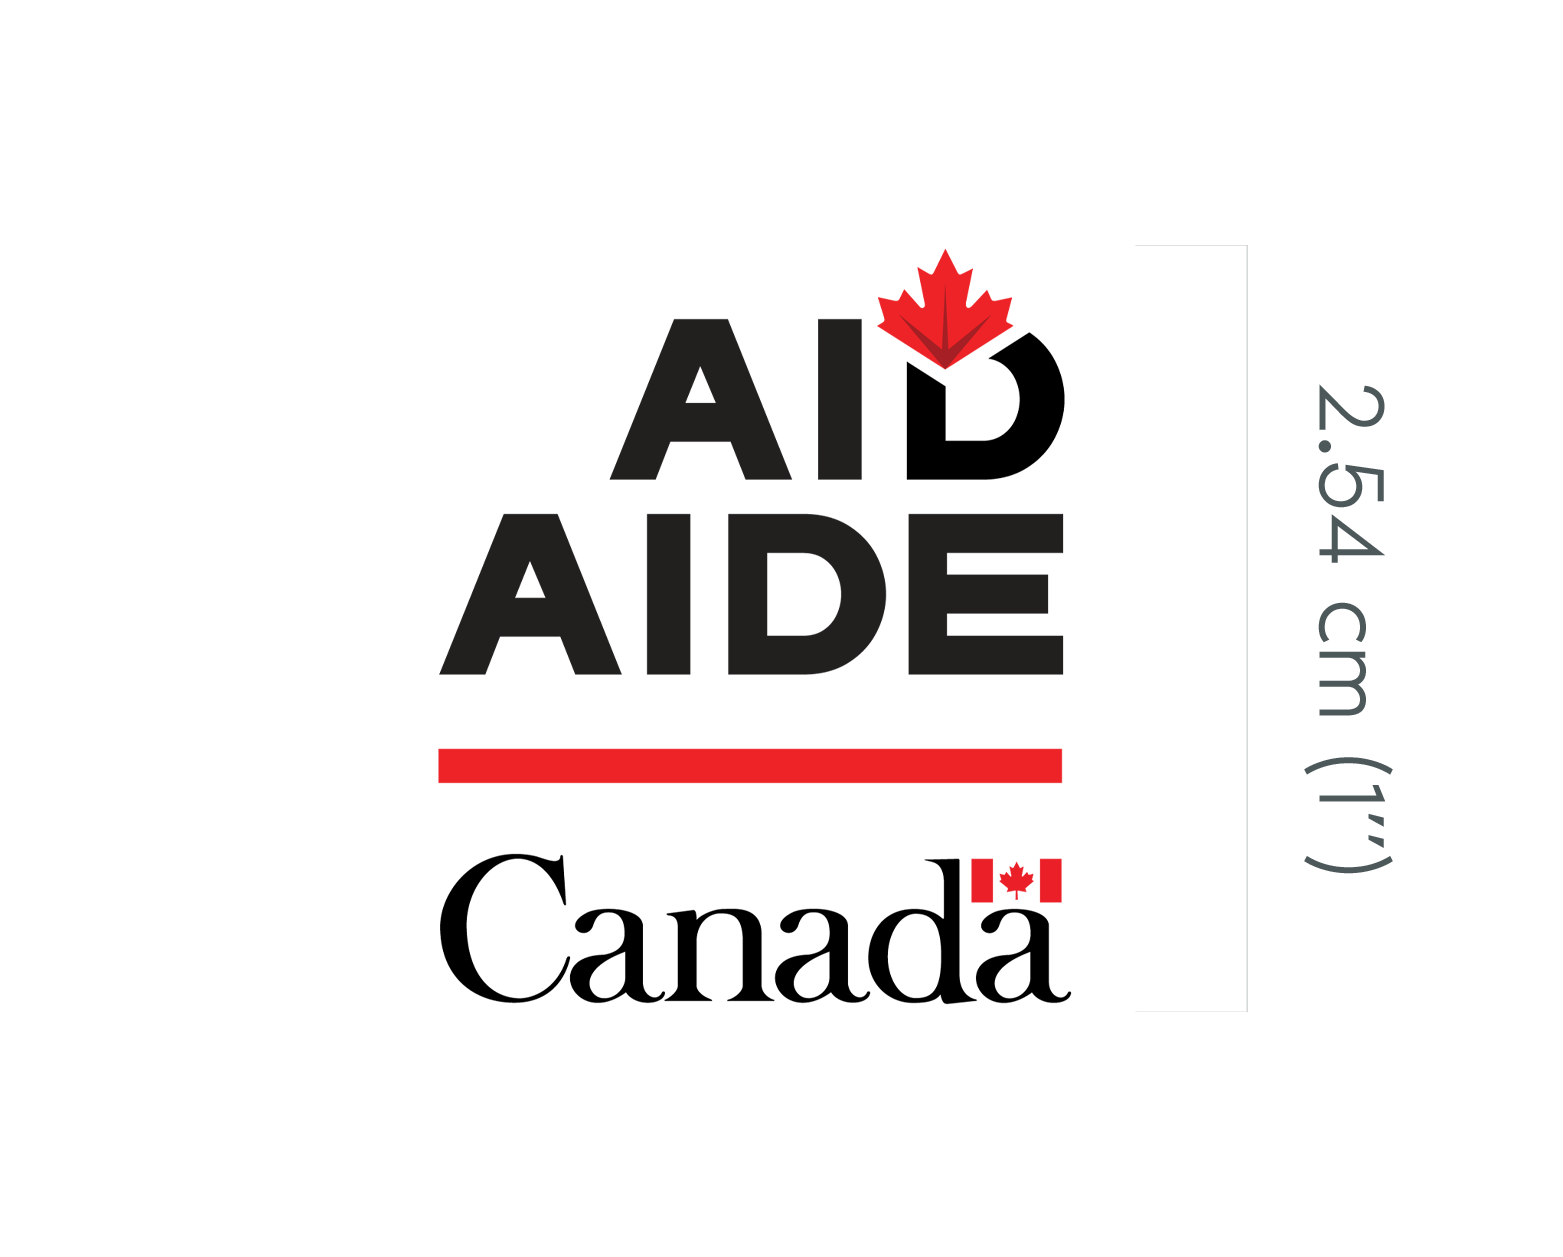 The graphic elements of the Canada Aid signature are shown to the left of the graphic: the word “AID” in all-caps with a maple leaf affixed to the top of the “D”, the French equivalent “AIDE” underneath, a red horizontal line, and the Canada Wordmark. To the right is a vertical bracket labelled 1” that’s aligned with the total height of the signature.